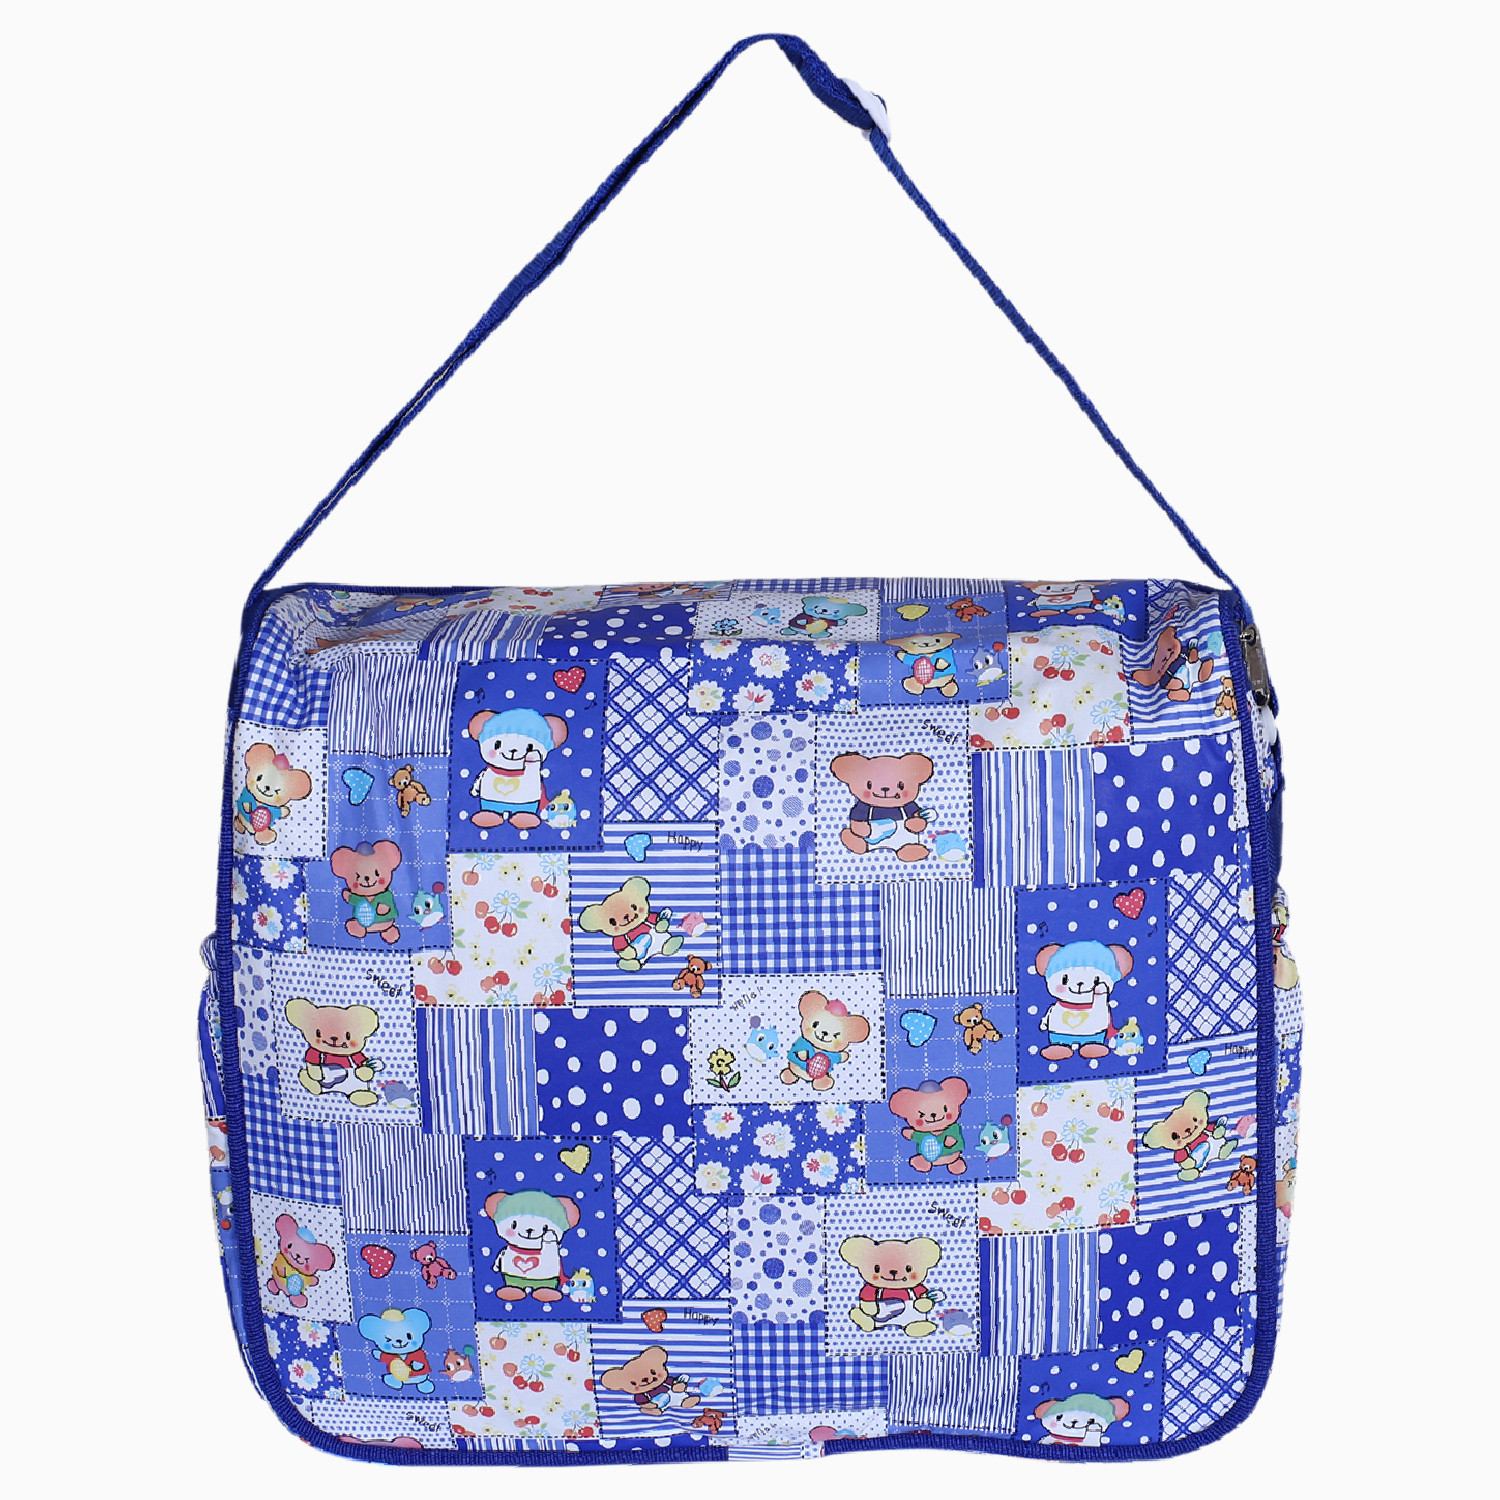 Kuber Industries PVC Multiuses Teddy Cartoon Print Mothers Bag/Diapers Bag With Handle For Traveling, storing (Blue)